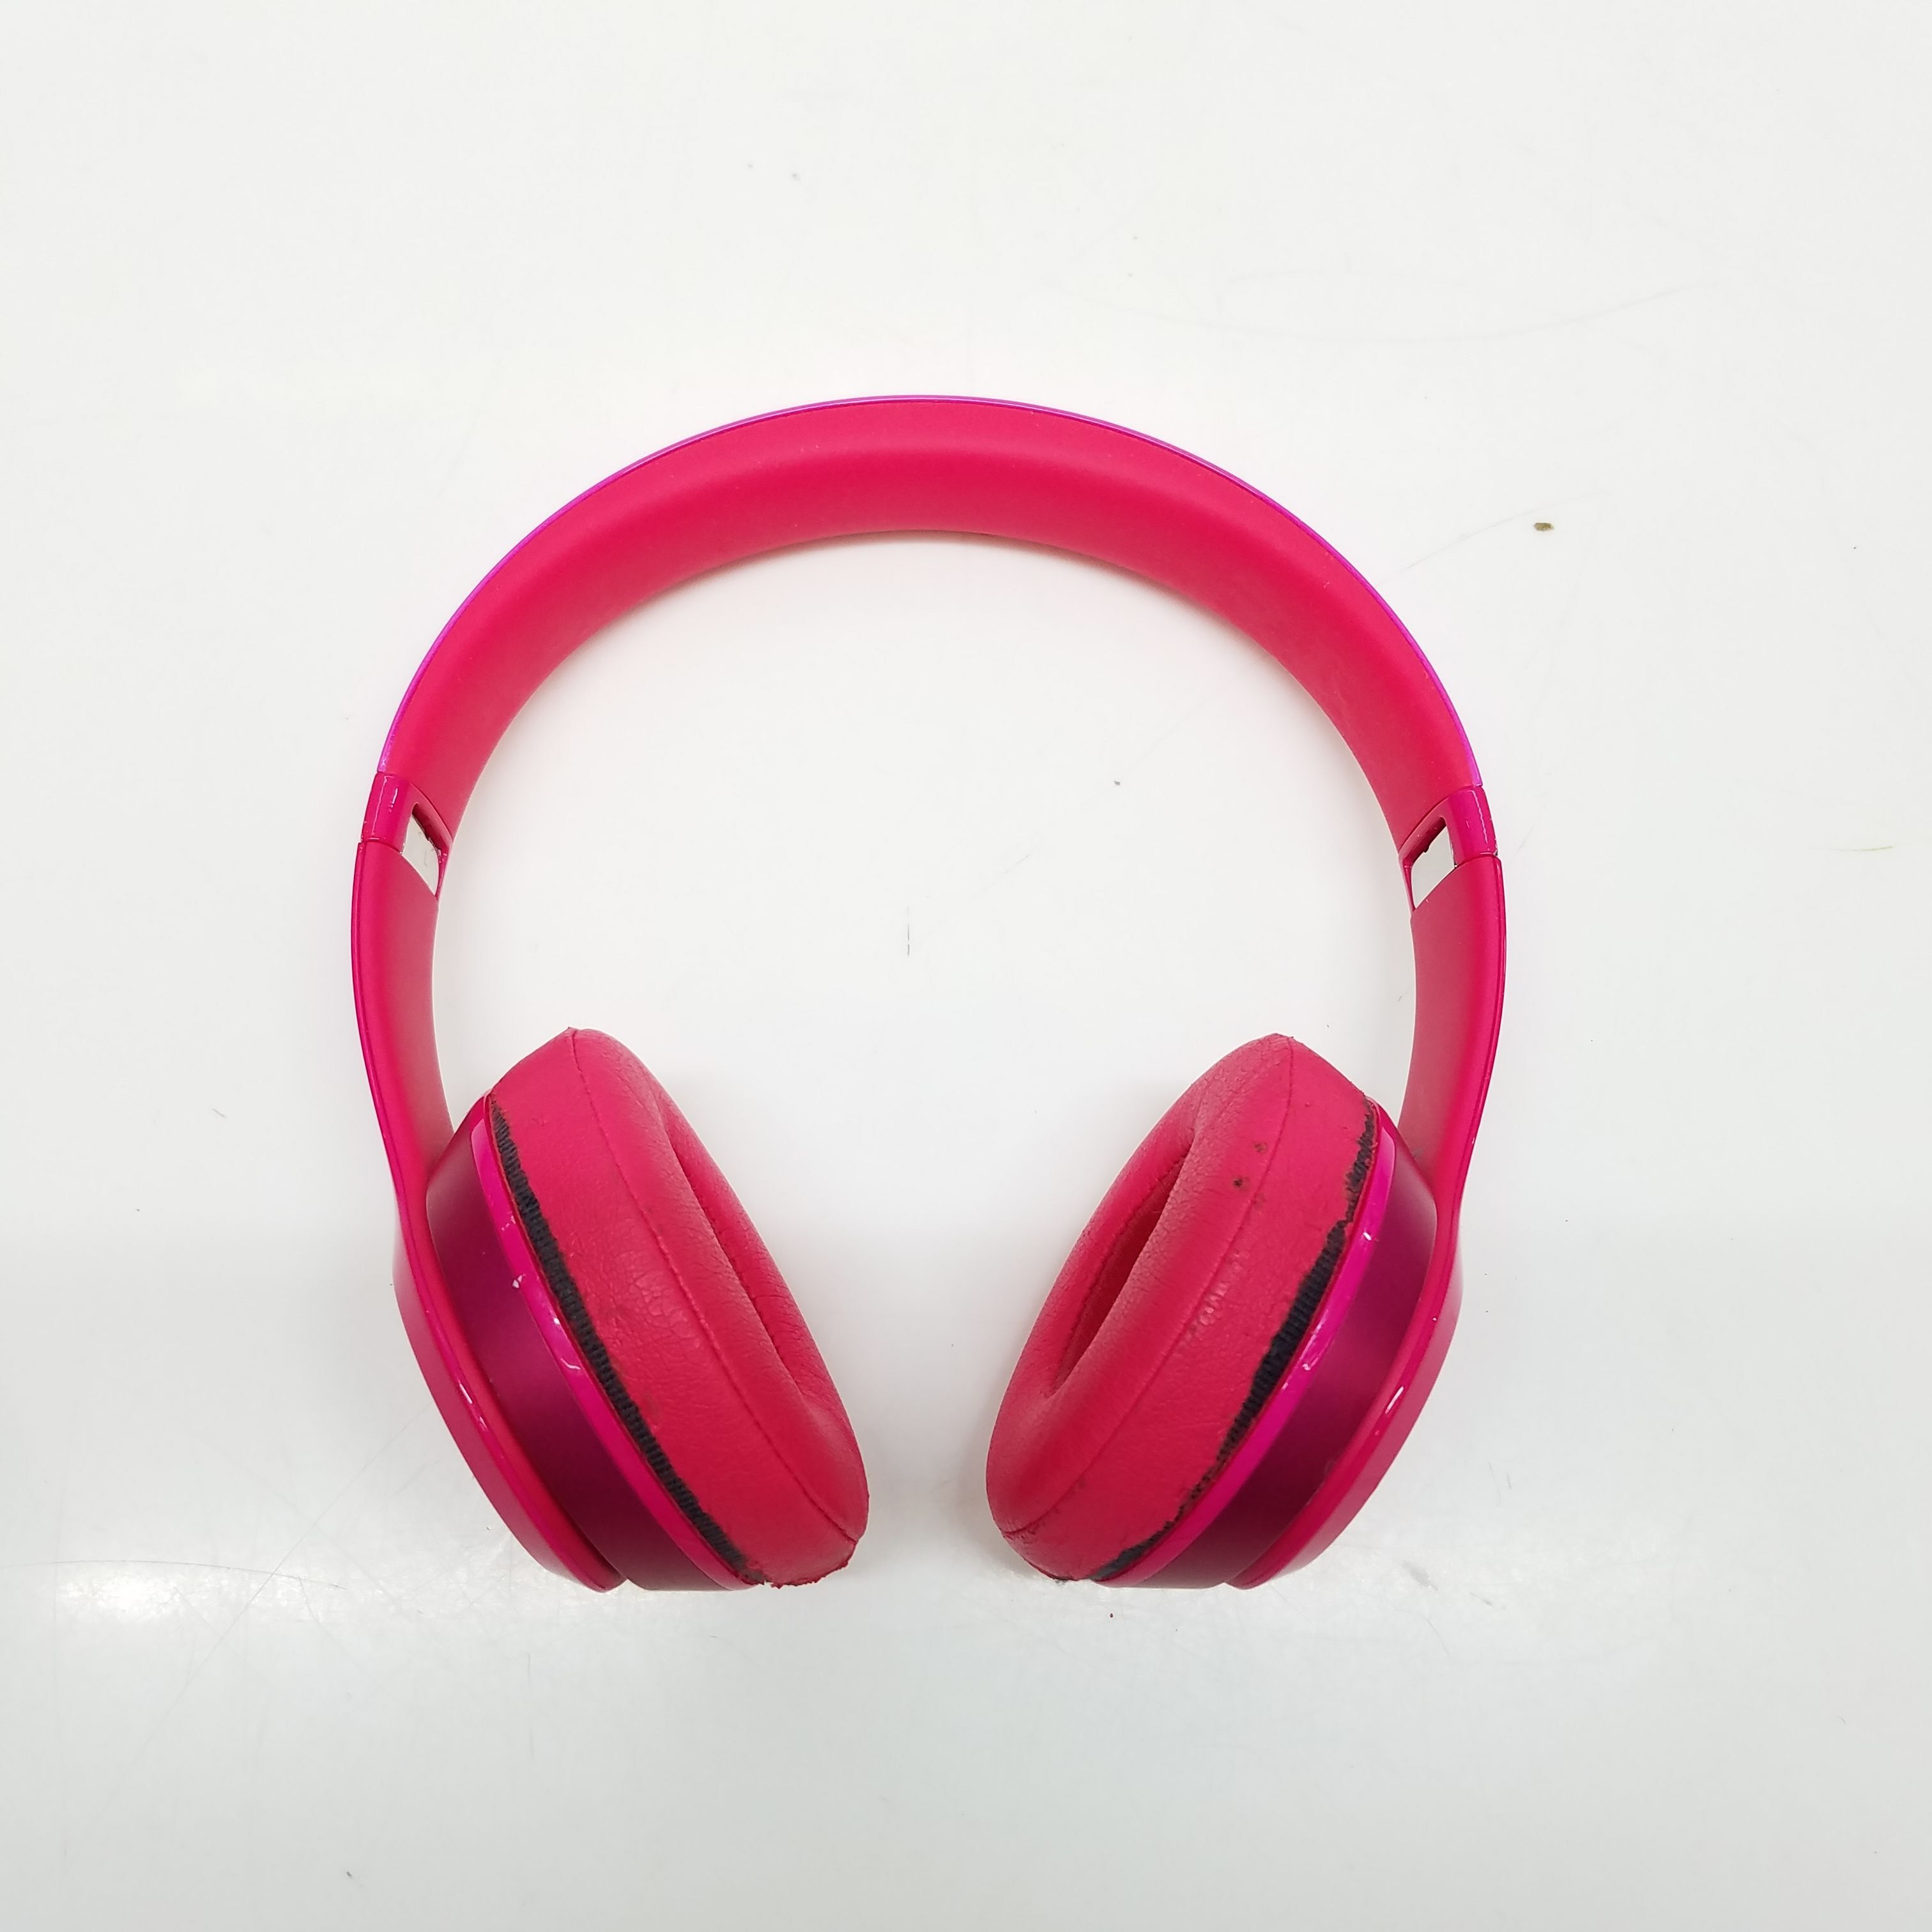 Buy the Beats by Dr. Dre Solo2 Wireless On Ear Headphones Pink